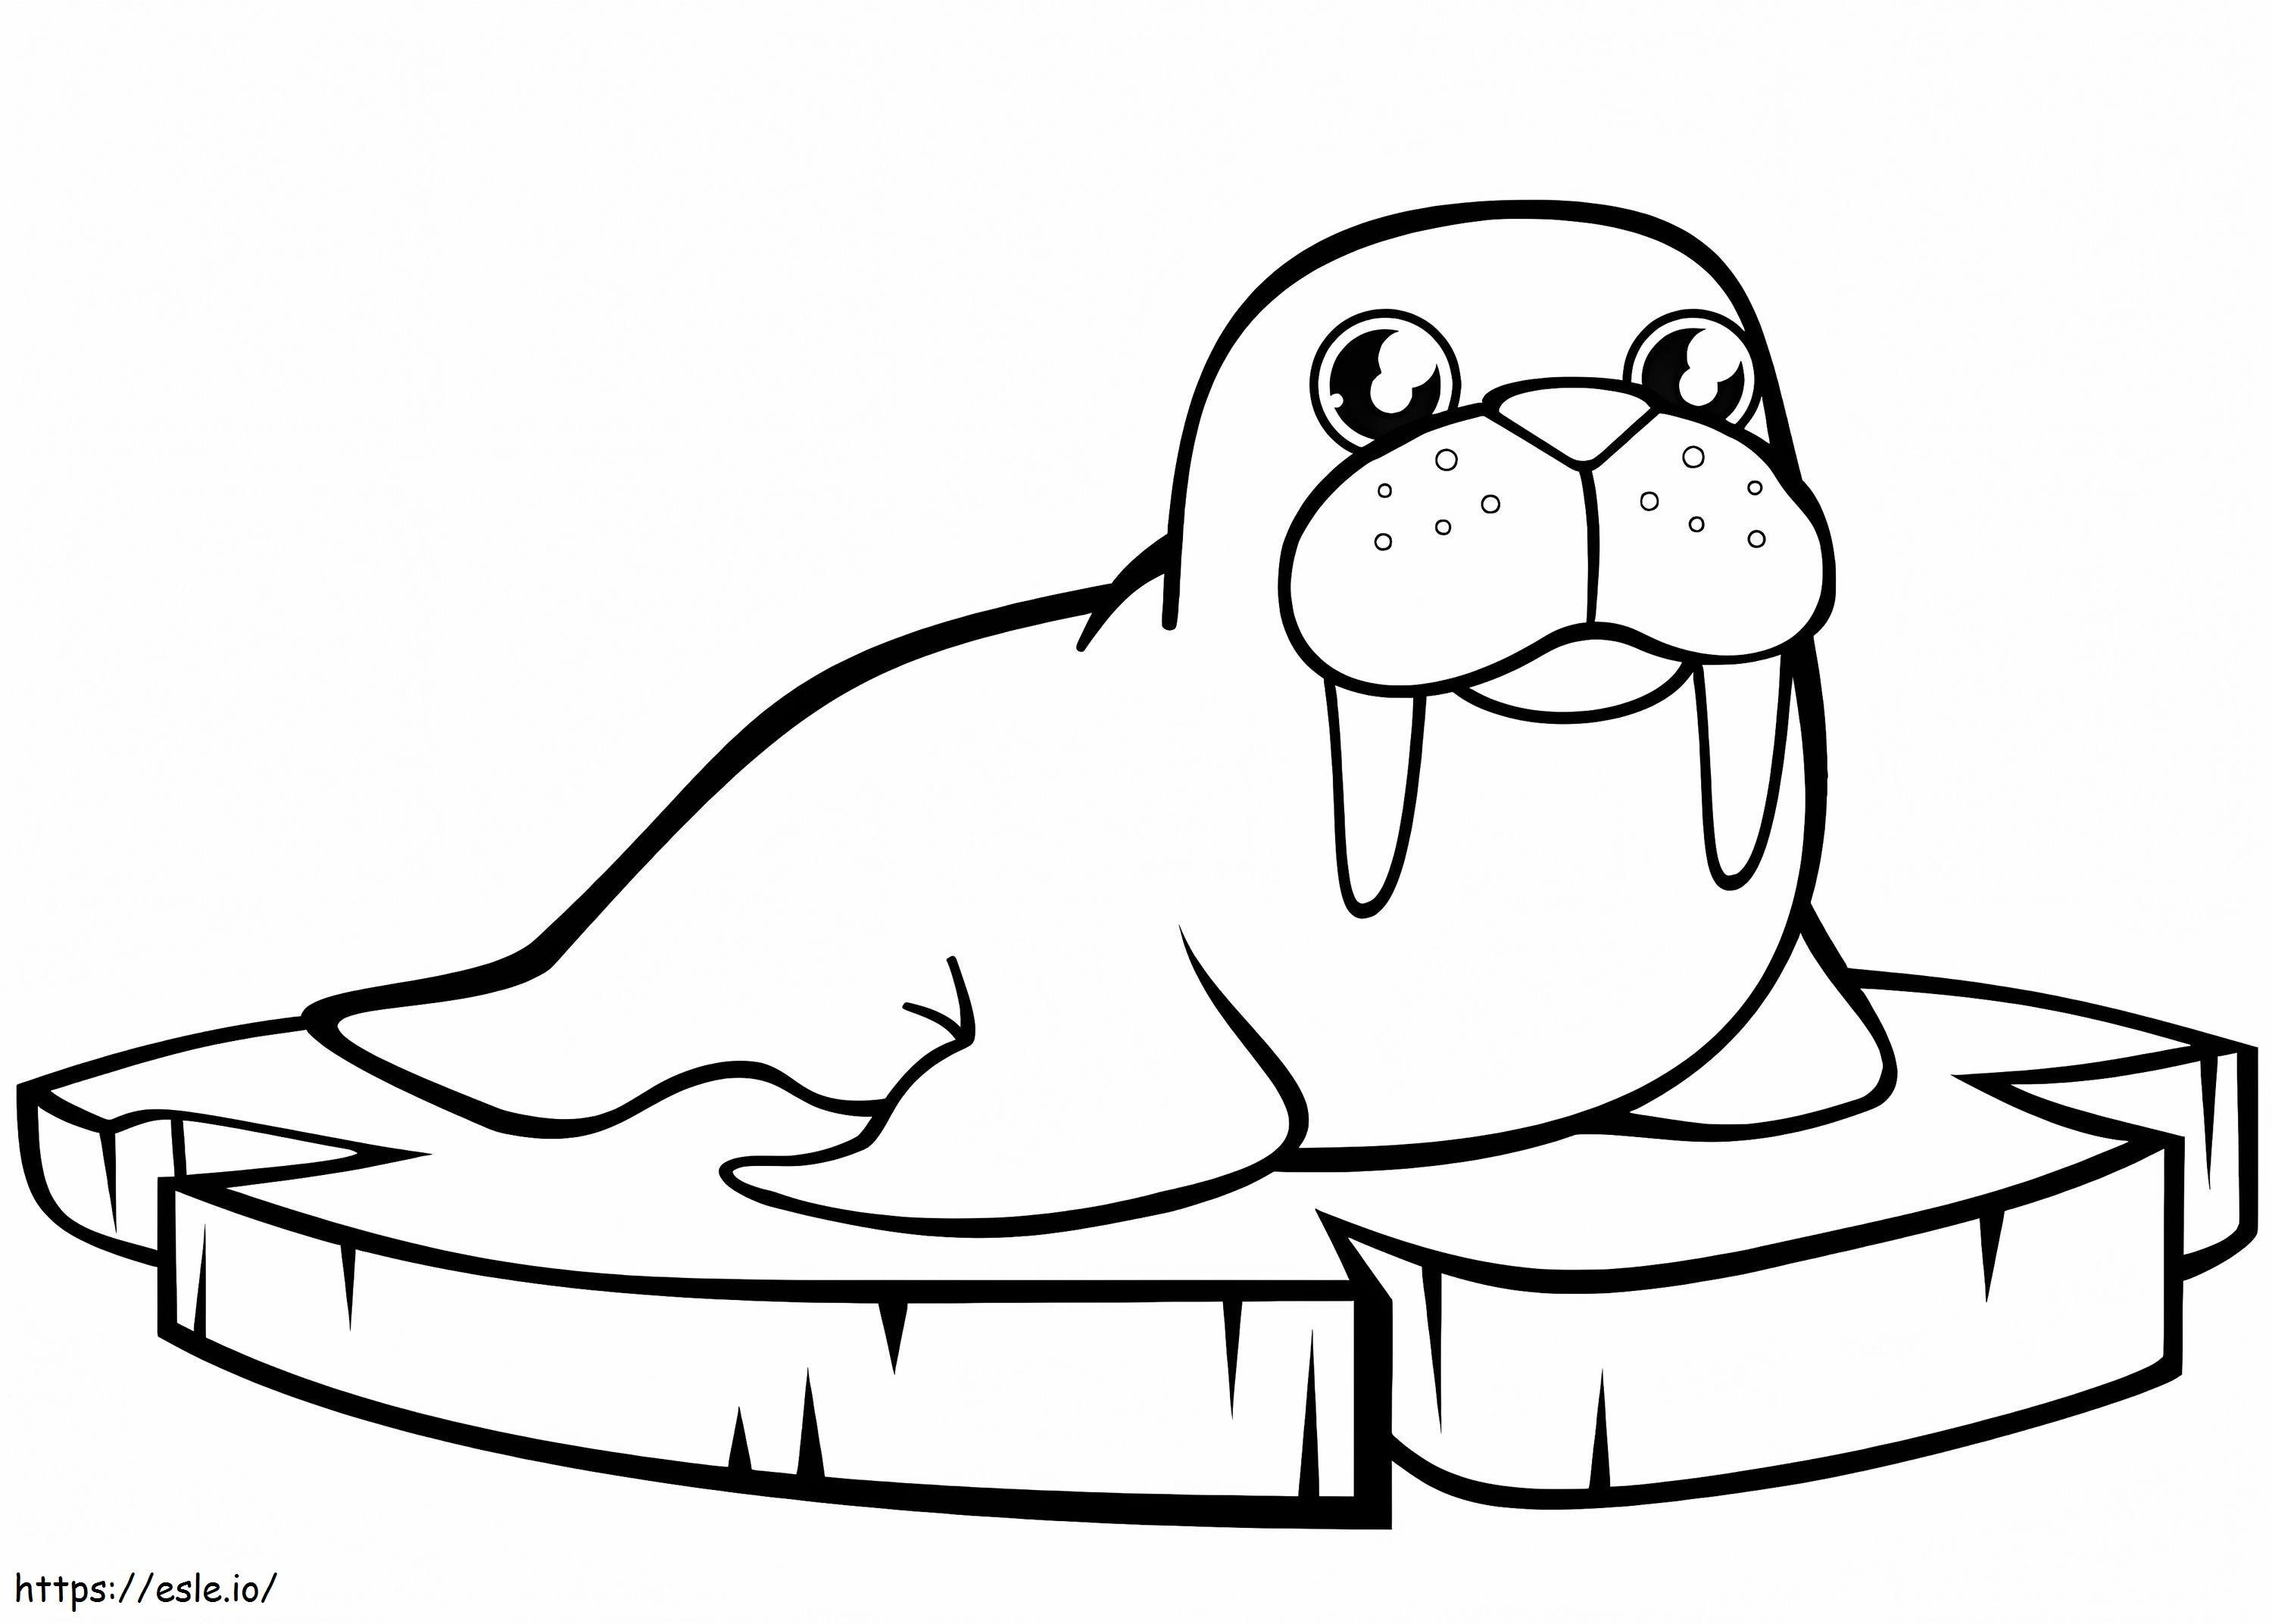 Cute Walrus On Ice coloring page